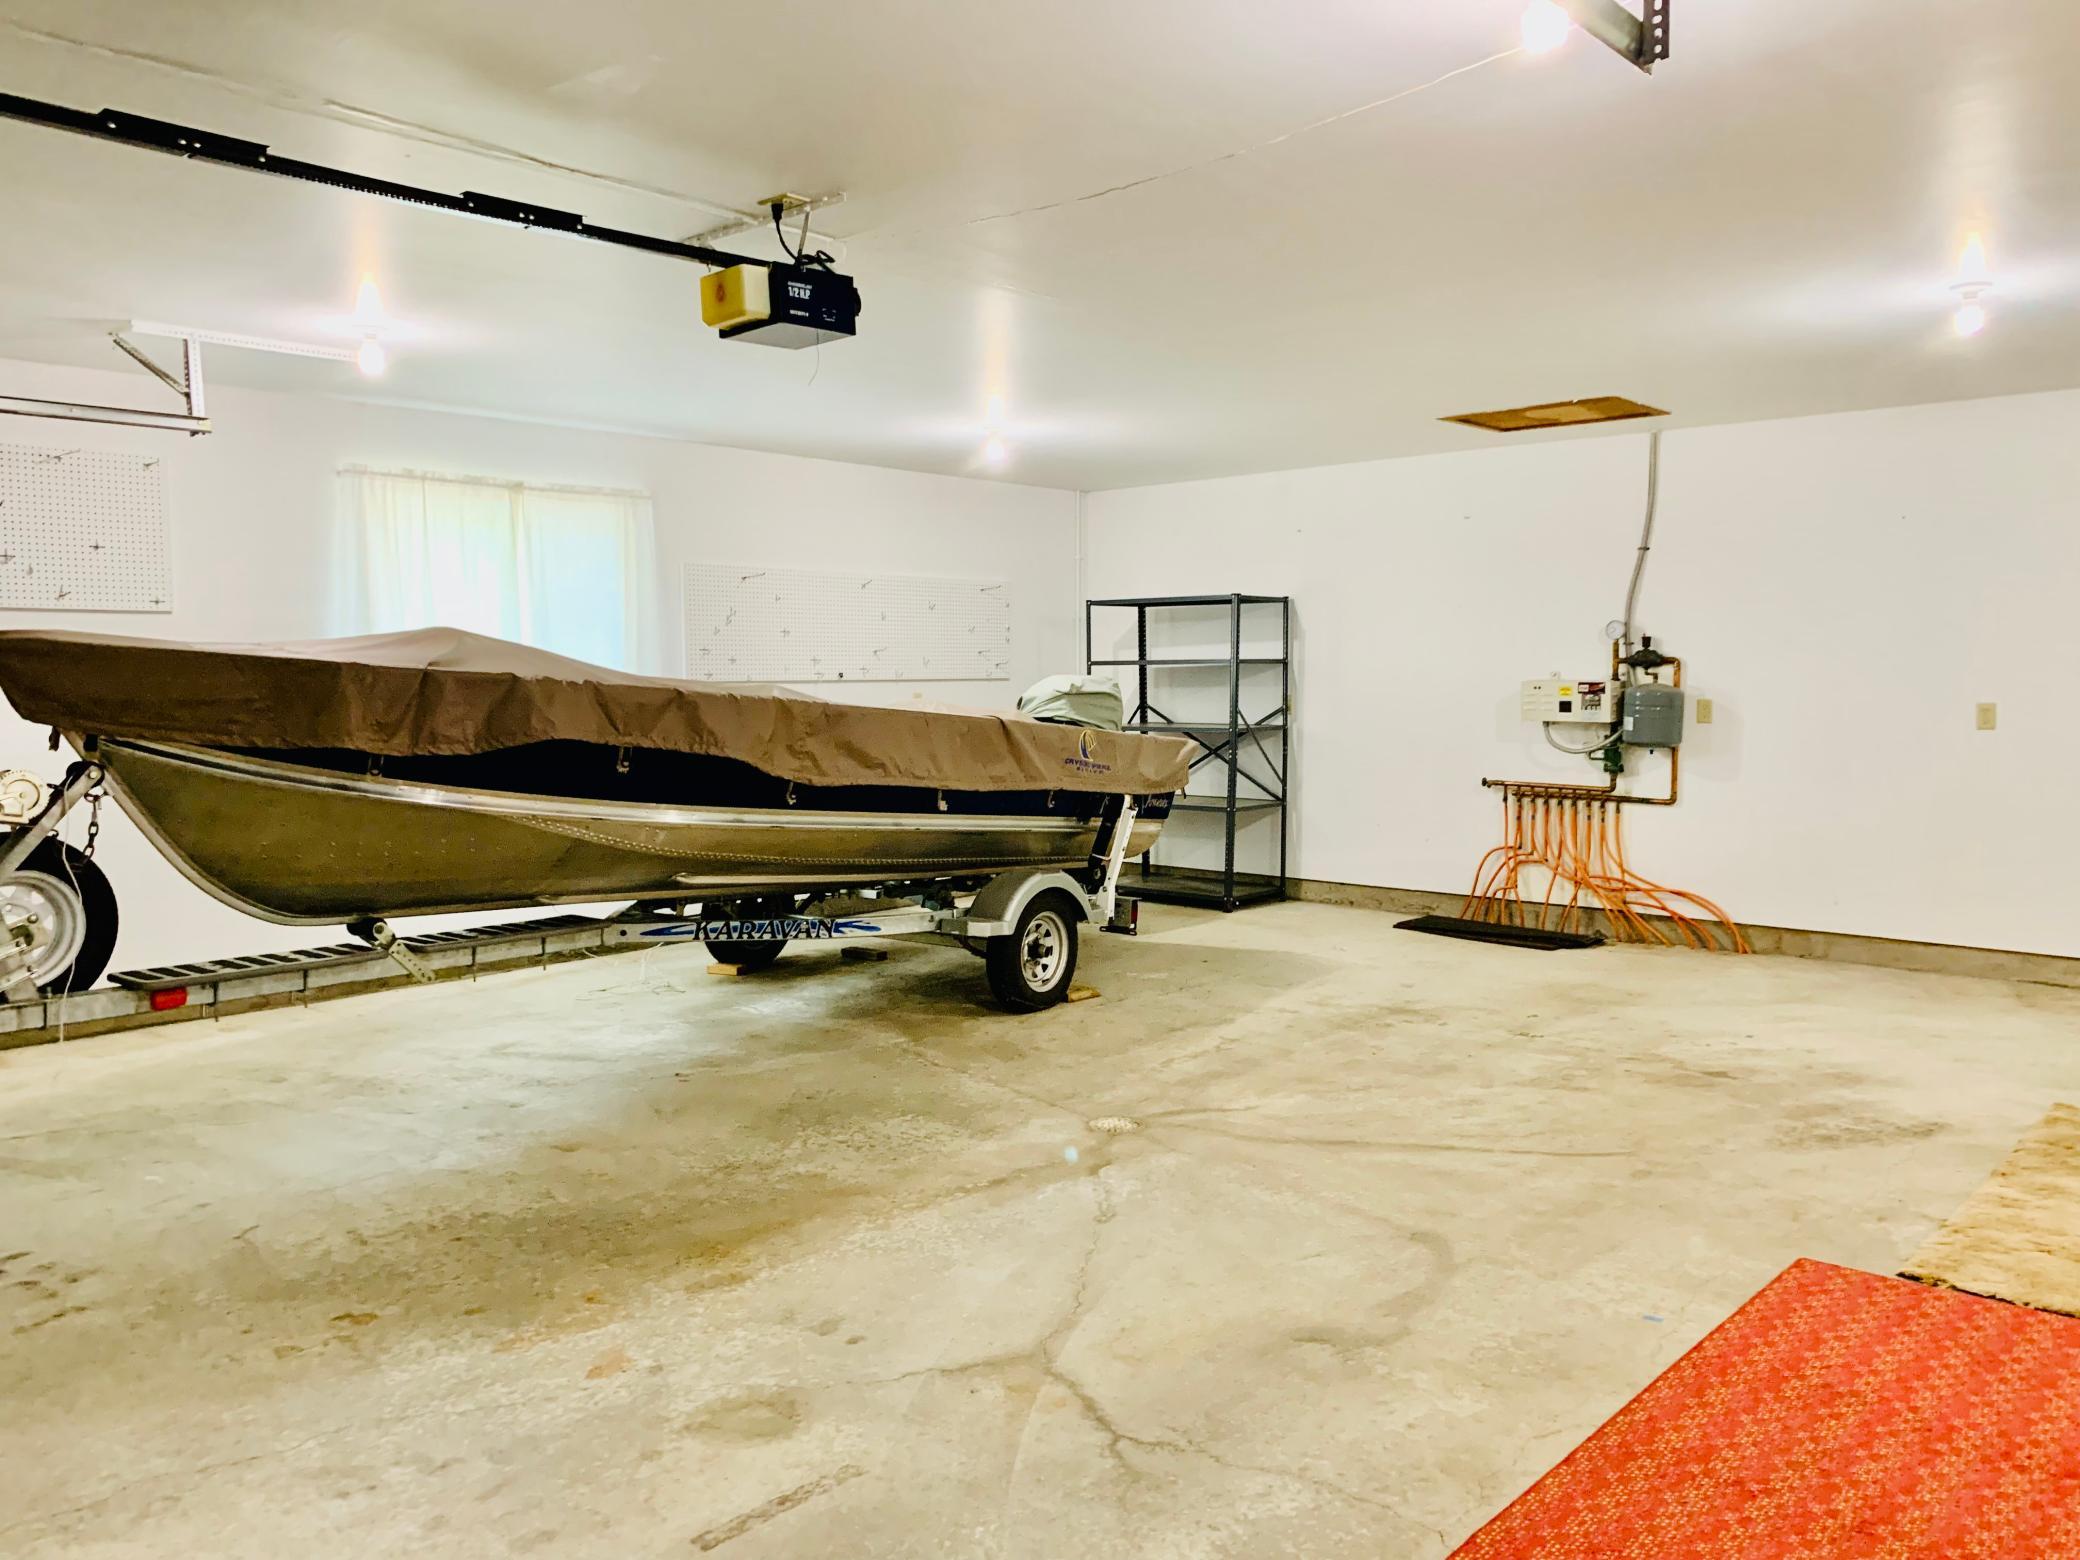 Inside attached garage (boat not included)